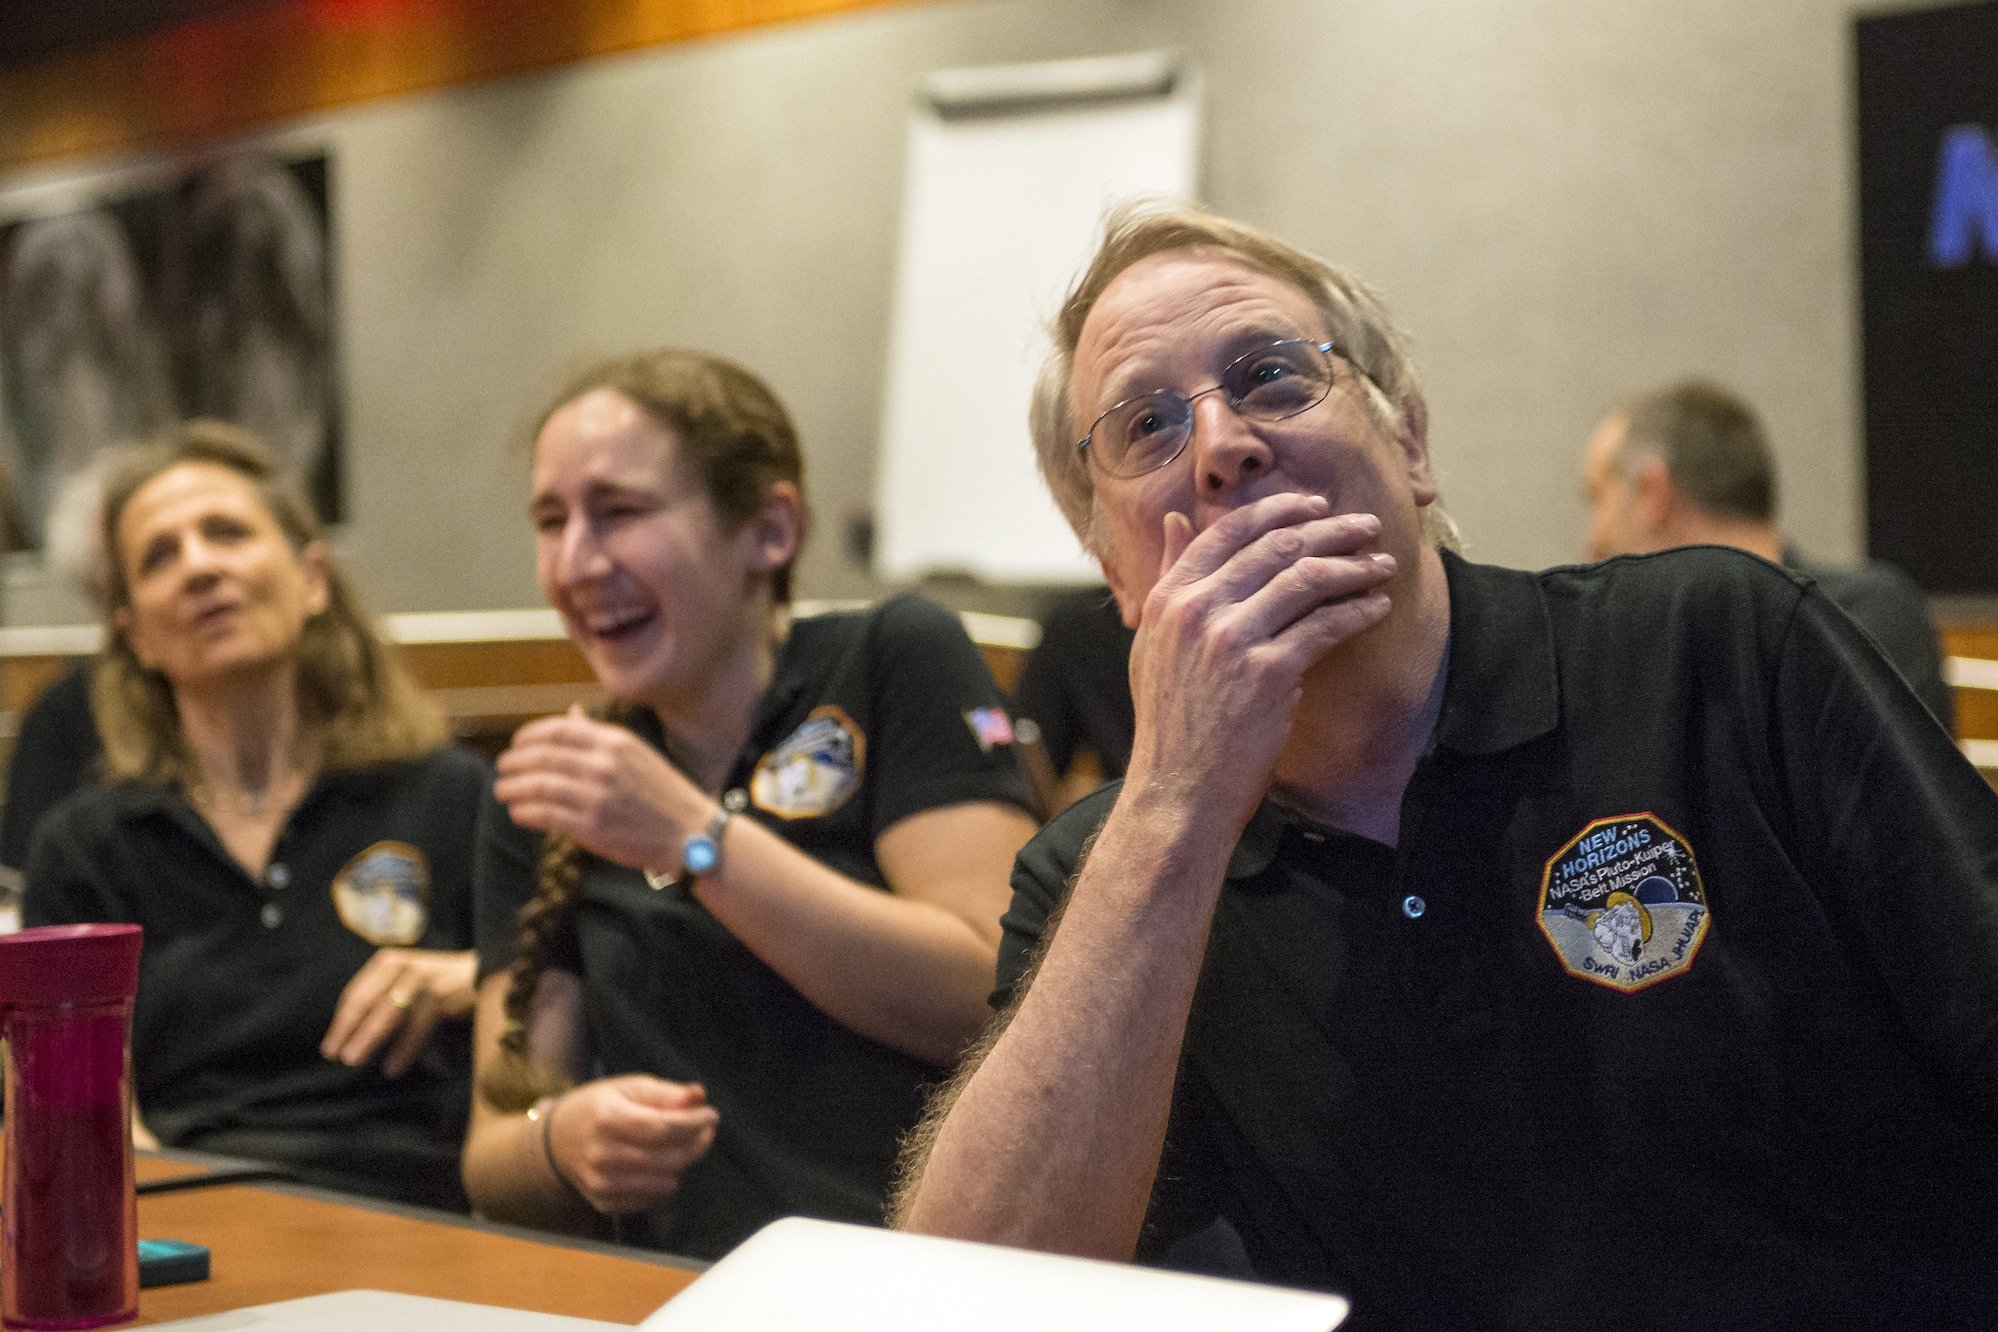 Members of the New Horizons science team, including (right to left) Professor Richard Binzel, graduate student Alissa Earle, and Cristina Dalle Ore (SETI Institute), react to seeing the spacecraft's last and sharpest image of Pluto before closest approach later in the day.